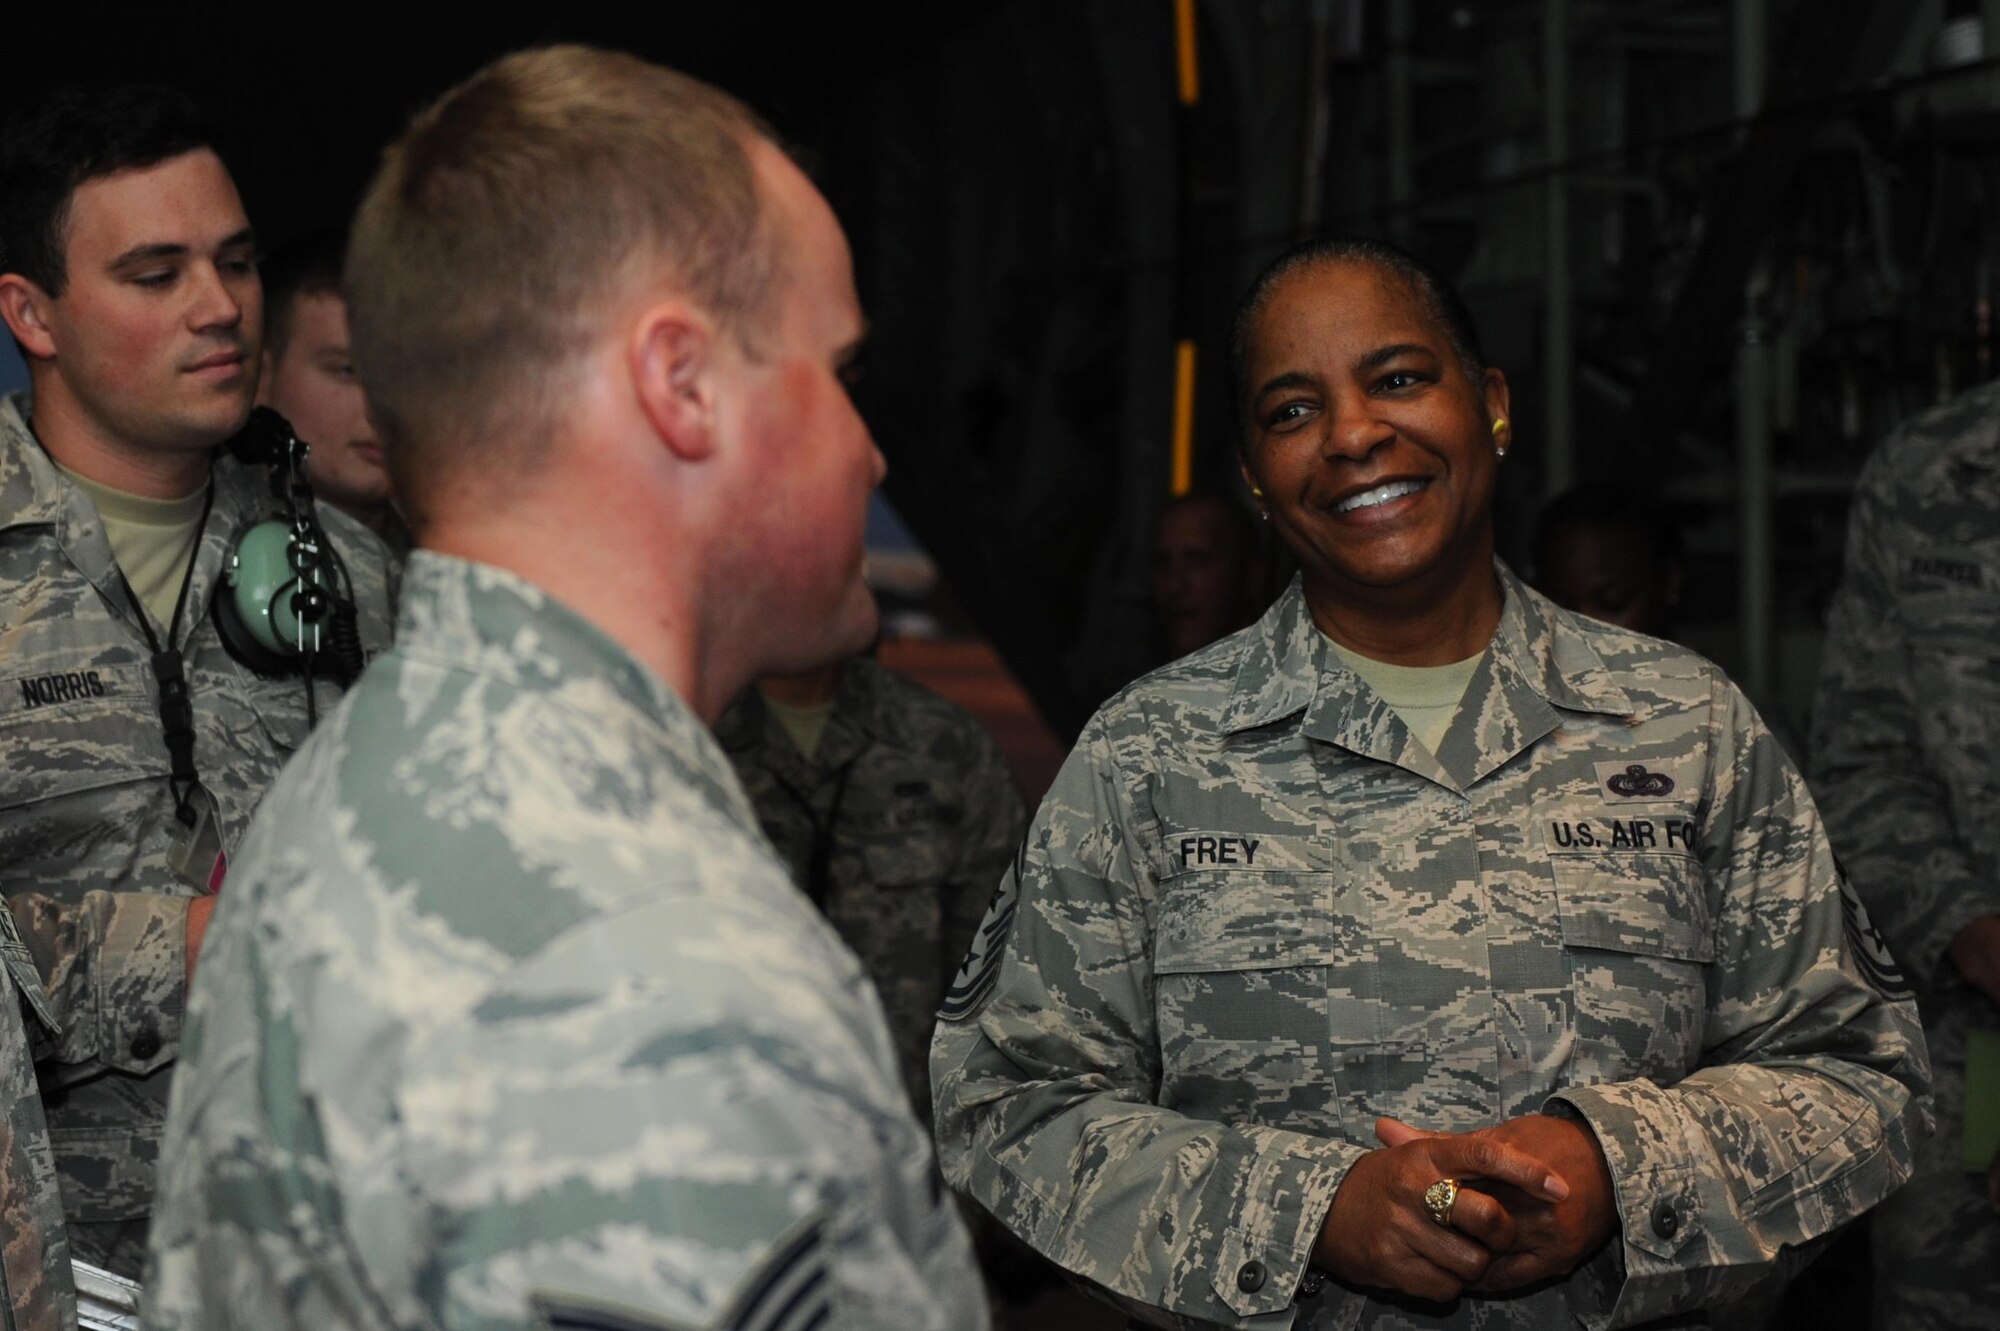 U.S. Air Force Chief Master Sgt. Shelina Frey, command chief for Air Mobility Command, engages with Airmen from the 19th Aircraft Maintenance Squadron during her tour of the base Nov. 1, 2016, at Little Rock Air Force Base, Ark. Airmen from units across the installation familiarized Frey with their unit’s missions during her visit.